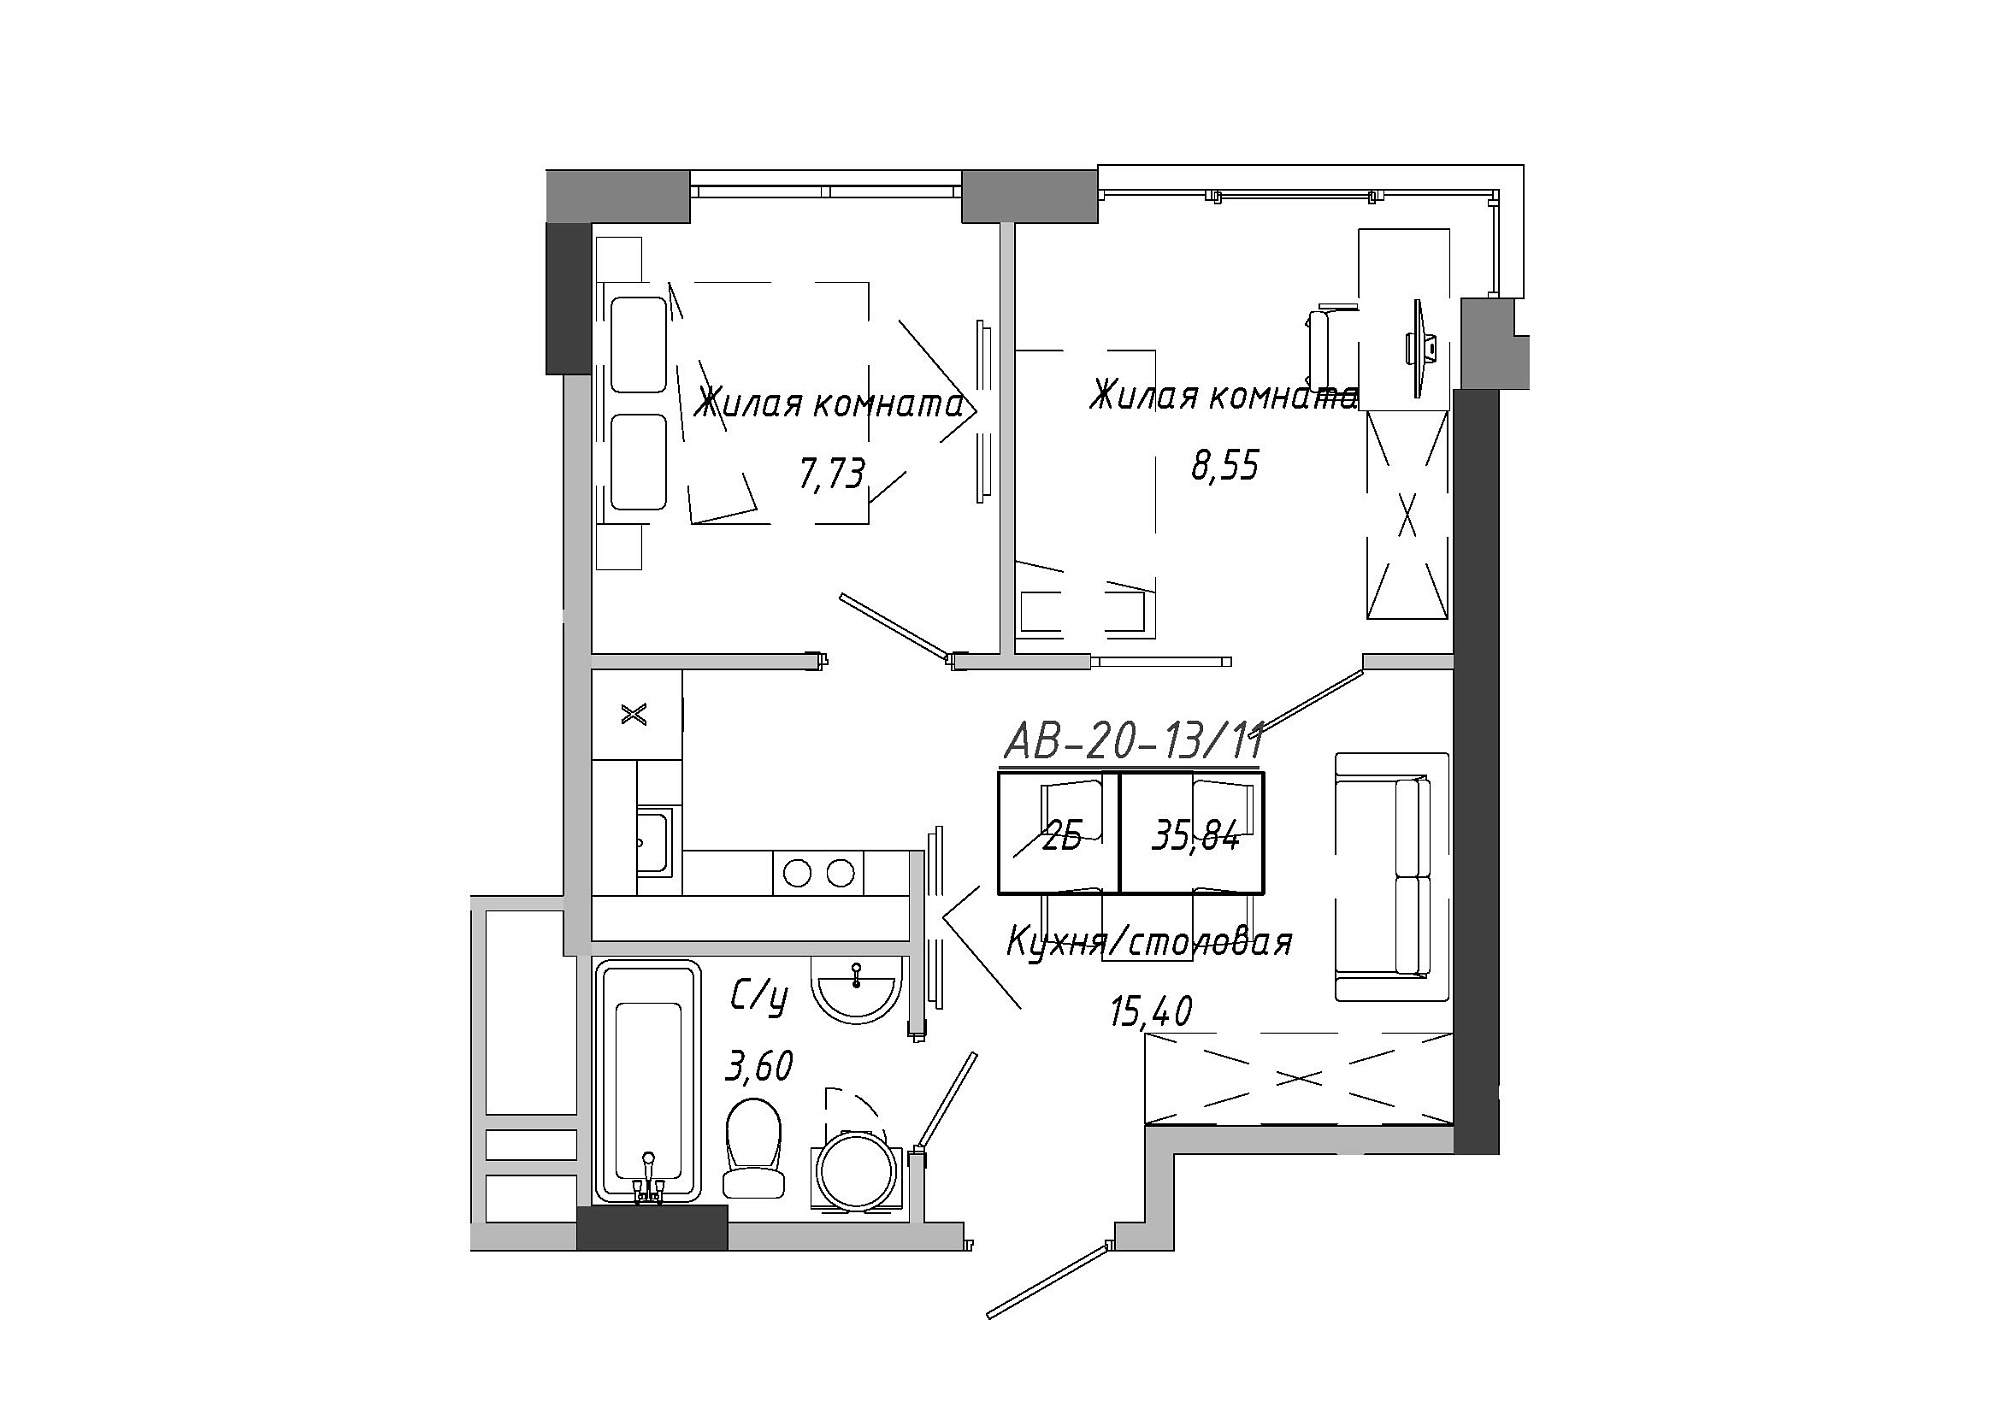 Planning 2-rm flats area 35.84m2, AB-20-13/00111.